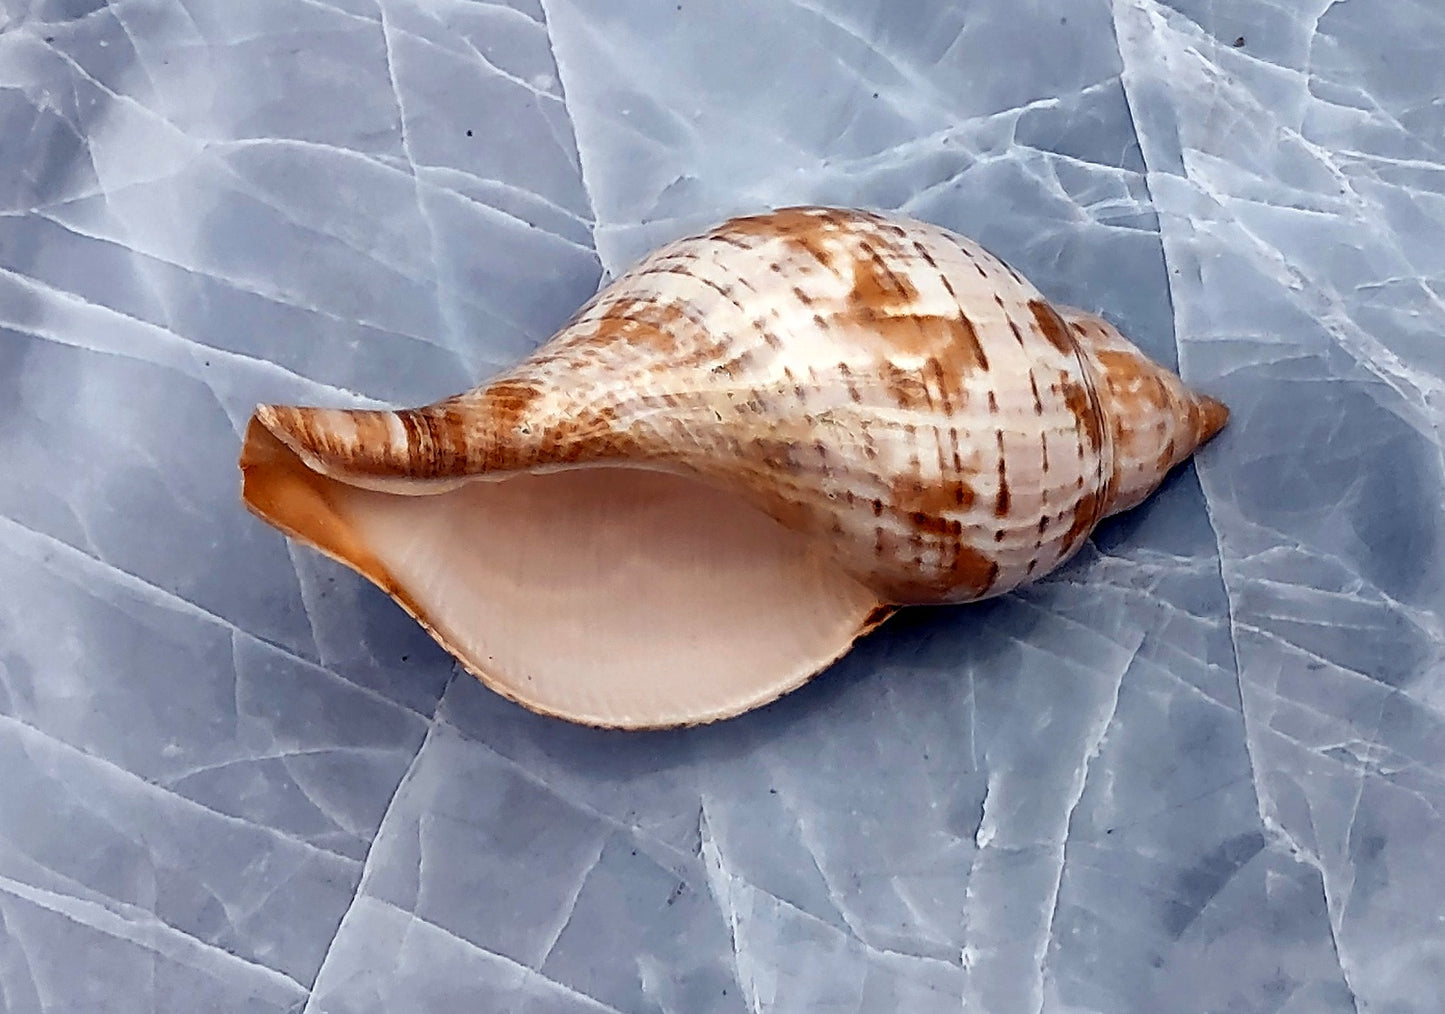 True Tulip Seashell - Fasciolaria Tulipa - (1 shell approx. 3-4 inches). Multiple shells laying to show the different angles of the coloring, shape, and patterns. Copyright 2022 SeaShellSupply.com.